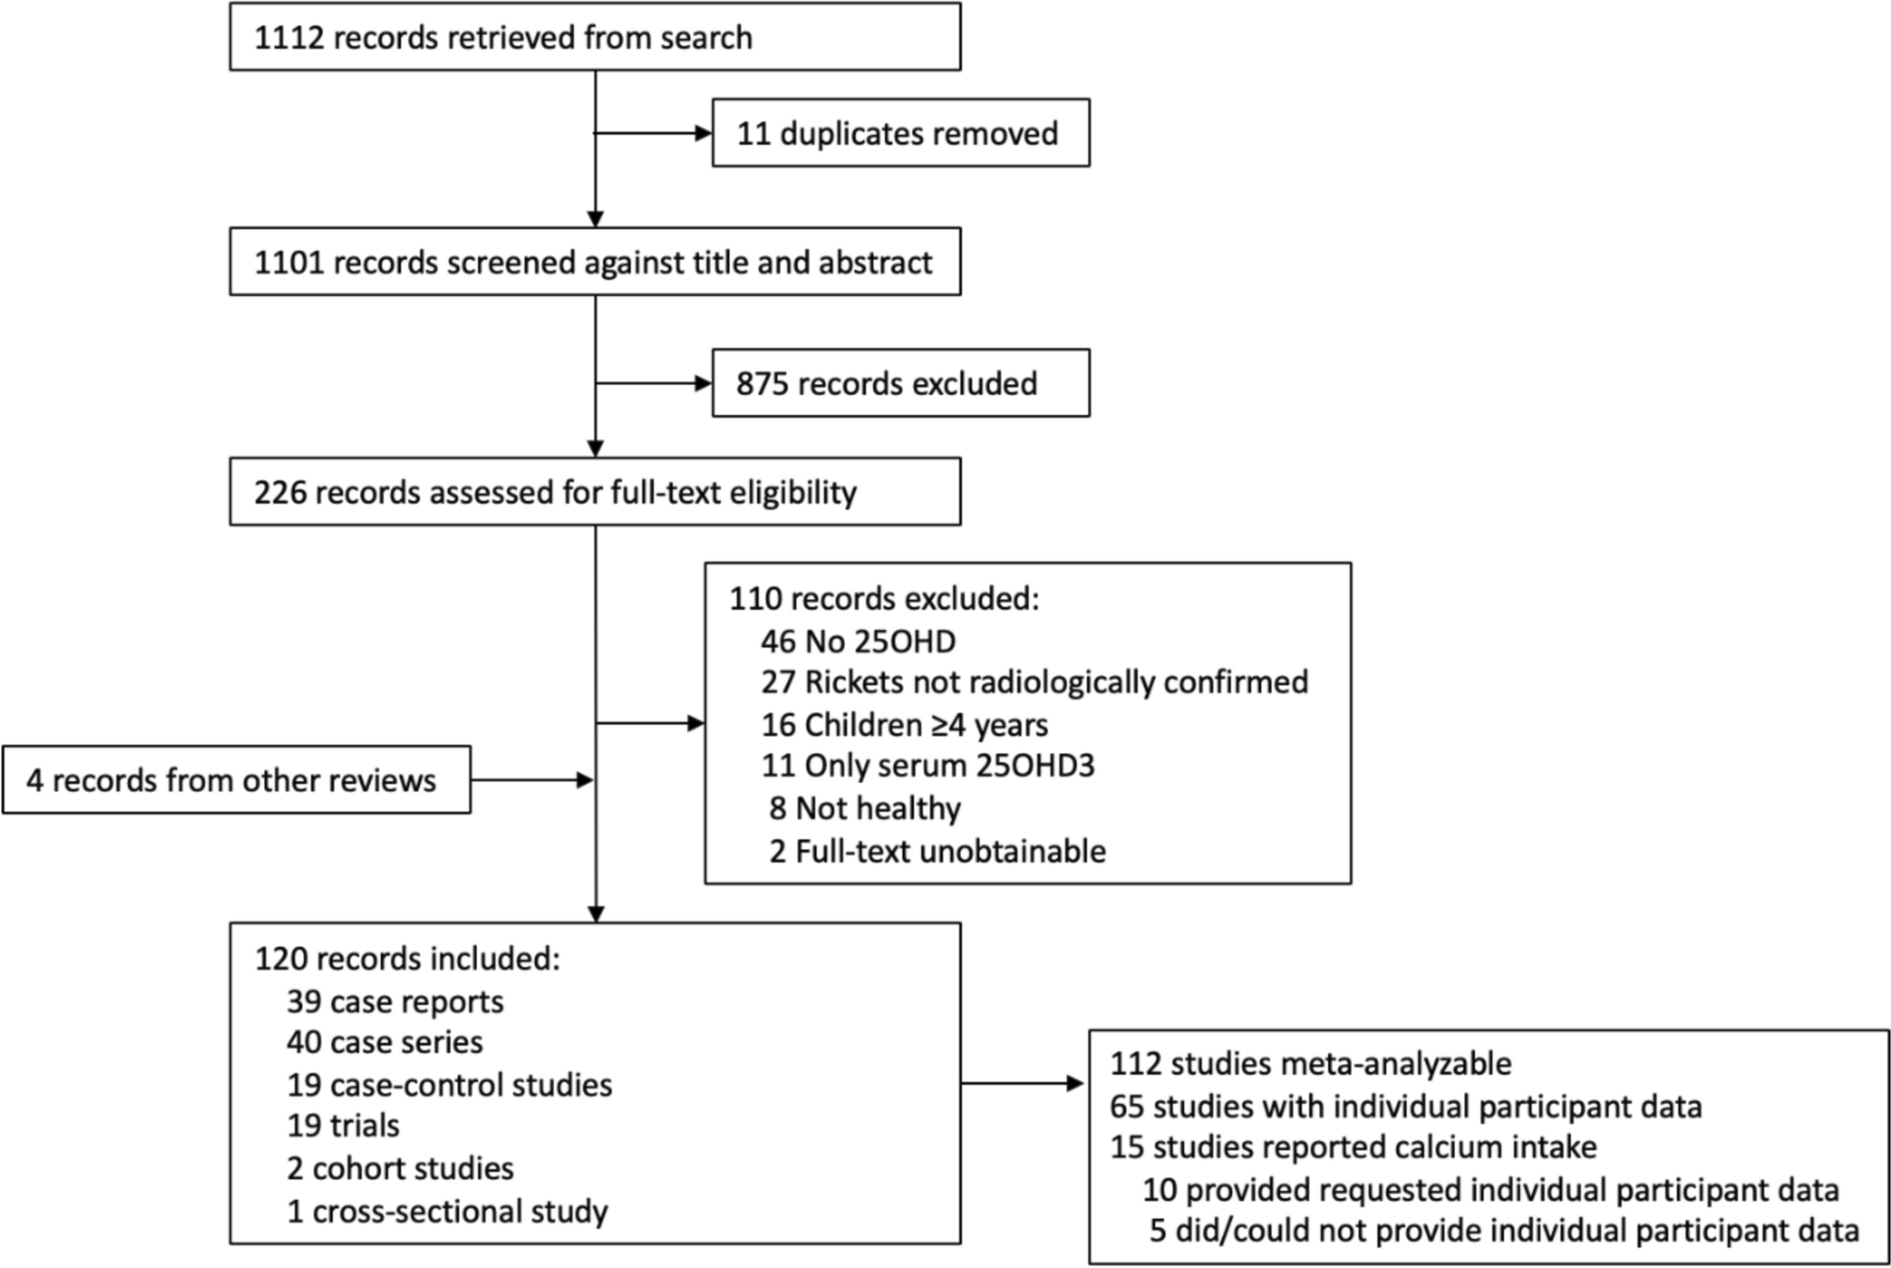 Serum 25-hydroxyvitamin D threshold and risk of rickets in young children: a systematic review and individual participant data meta-analysis to inform the development of dietary requirements for vitamin D